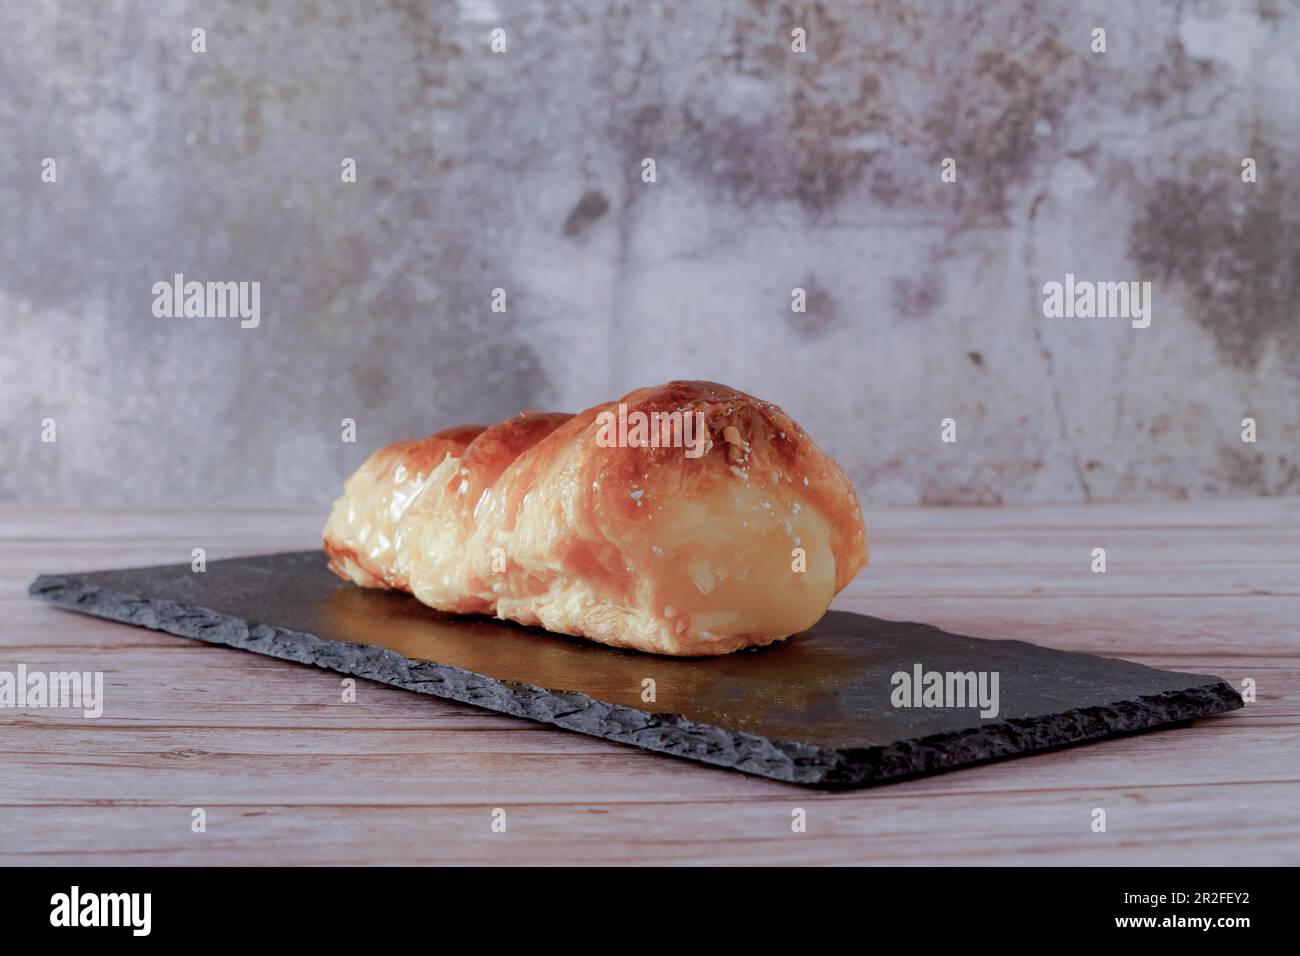 Puff pastry horn filled with pastry cream on a black blackboard on a wooden table Stock Photo